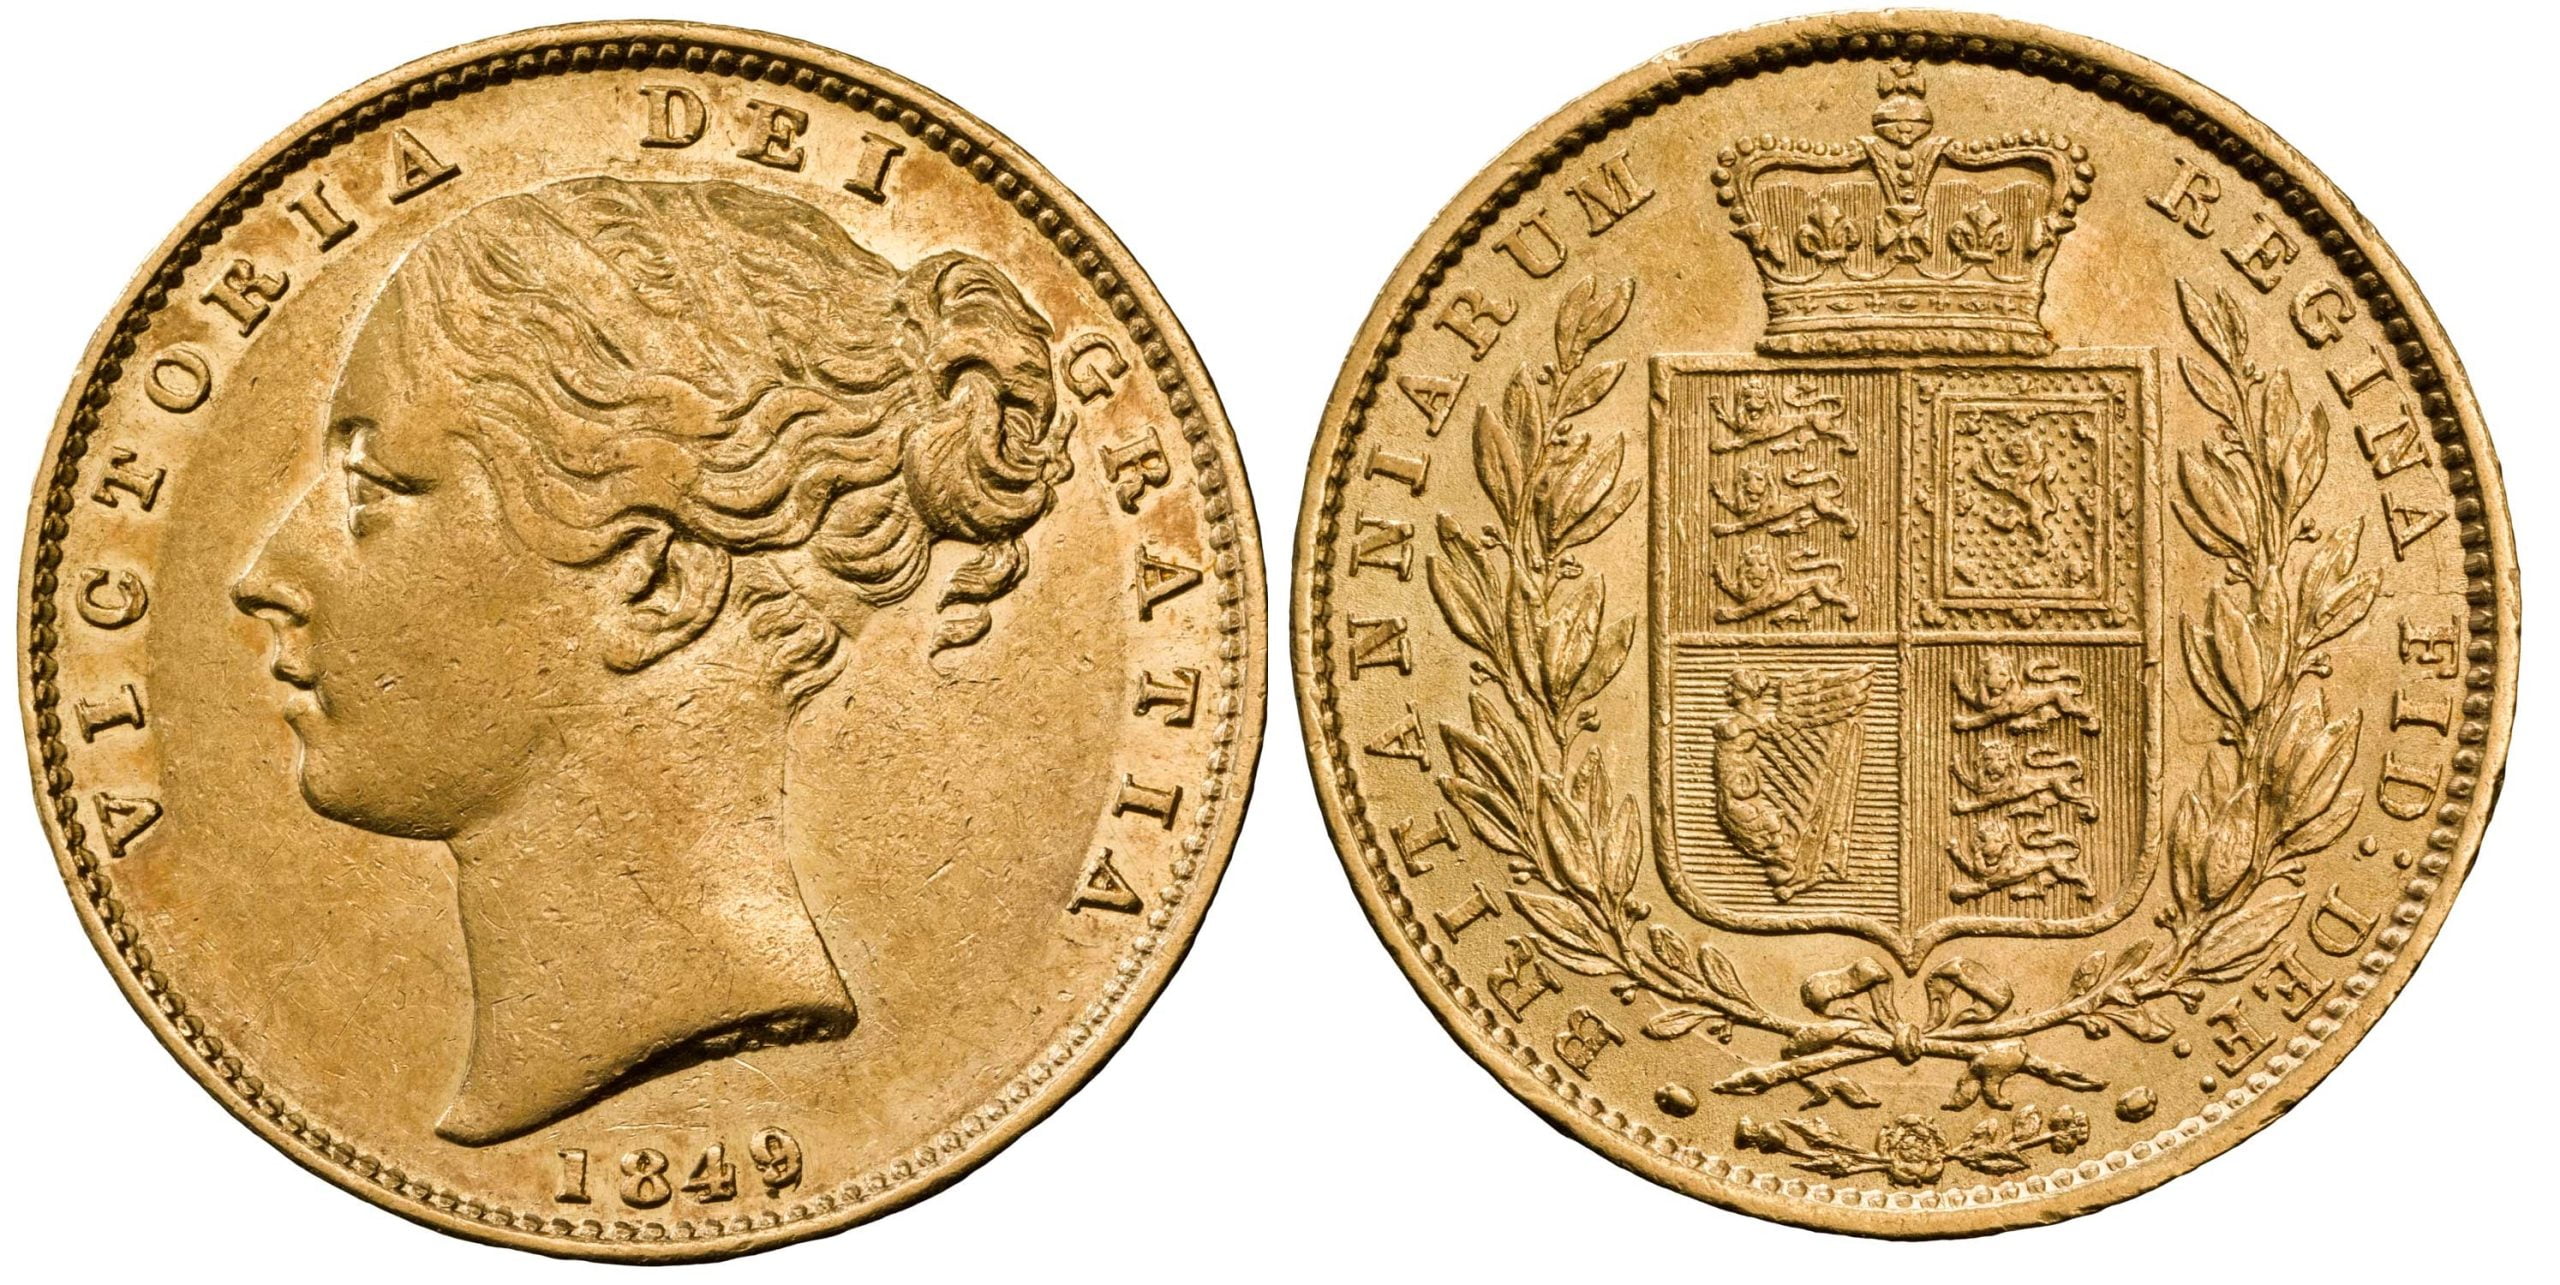 Gold Sovereing Victoria 1849 L